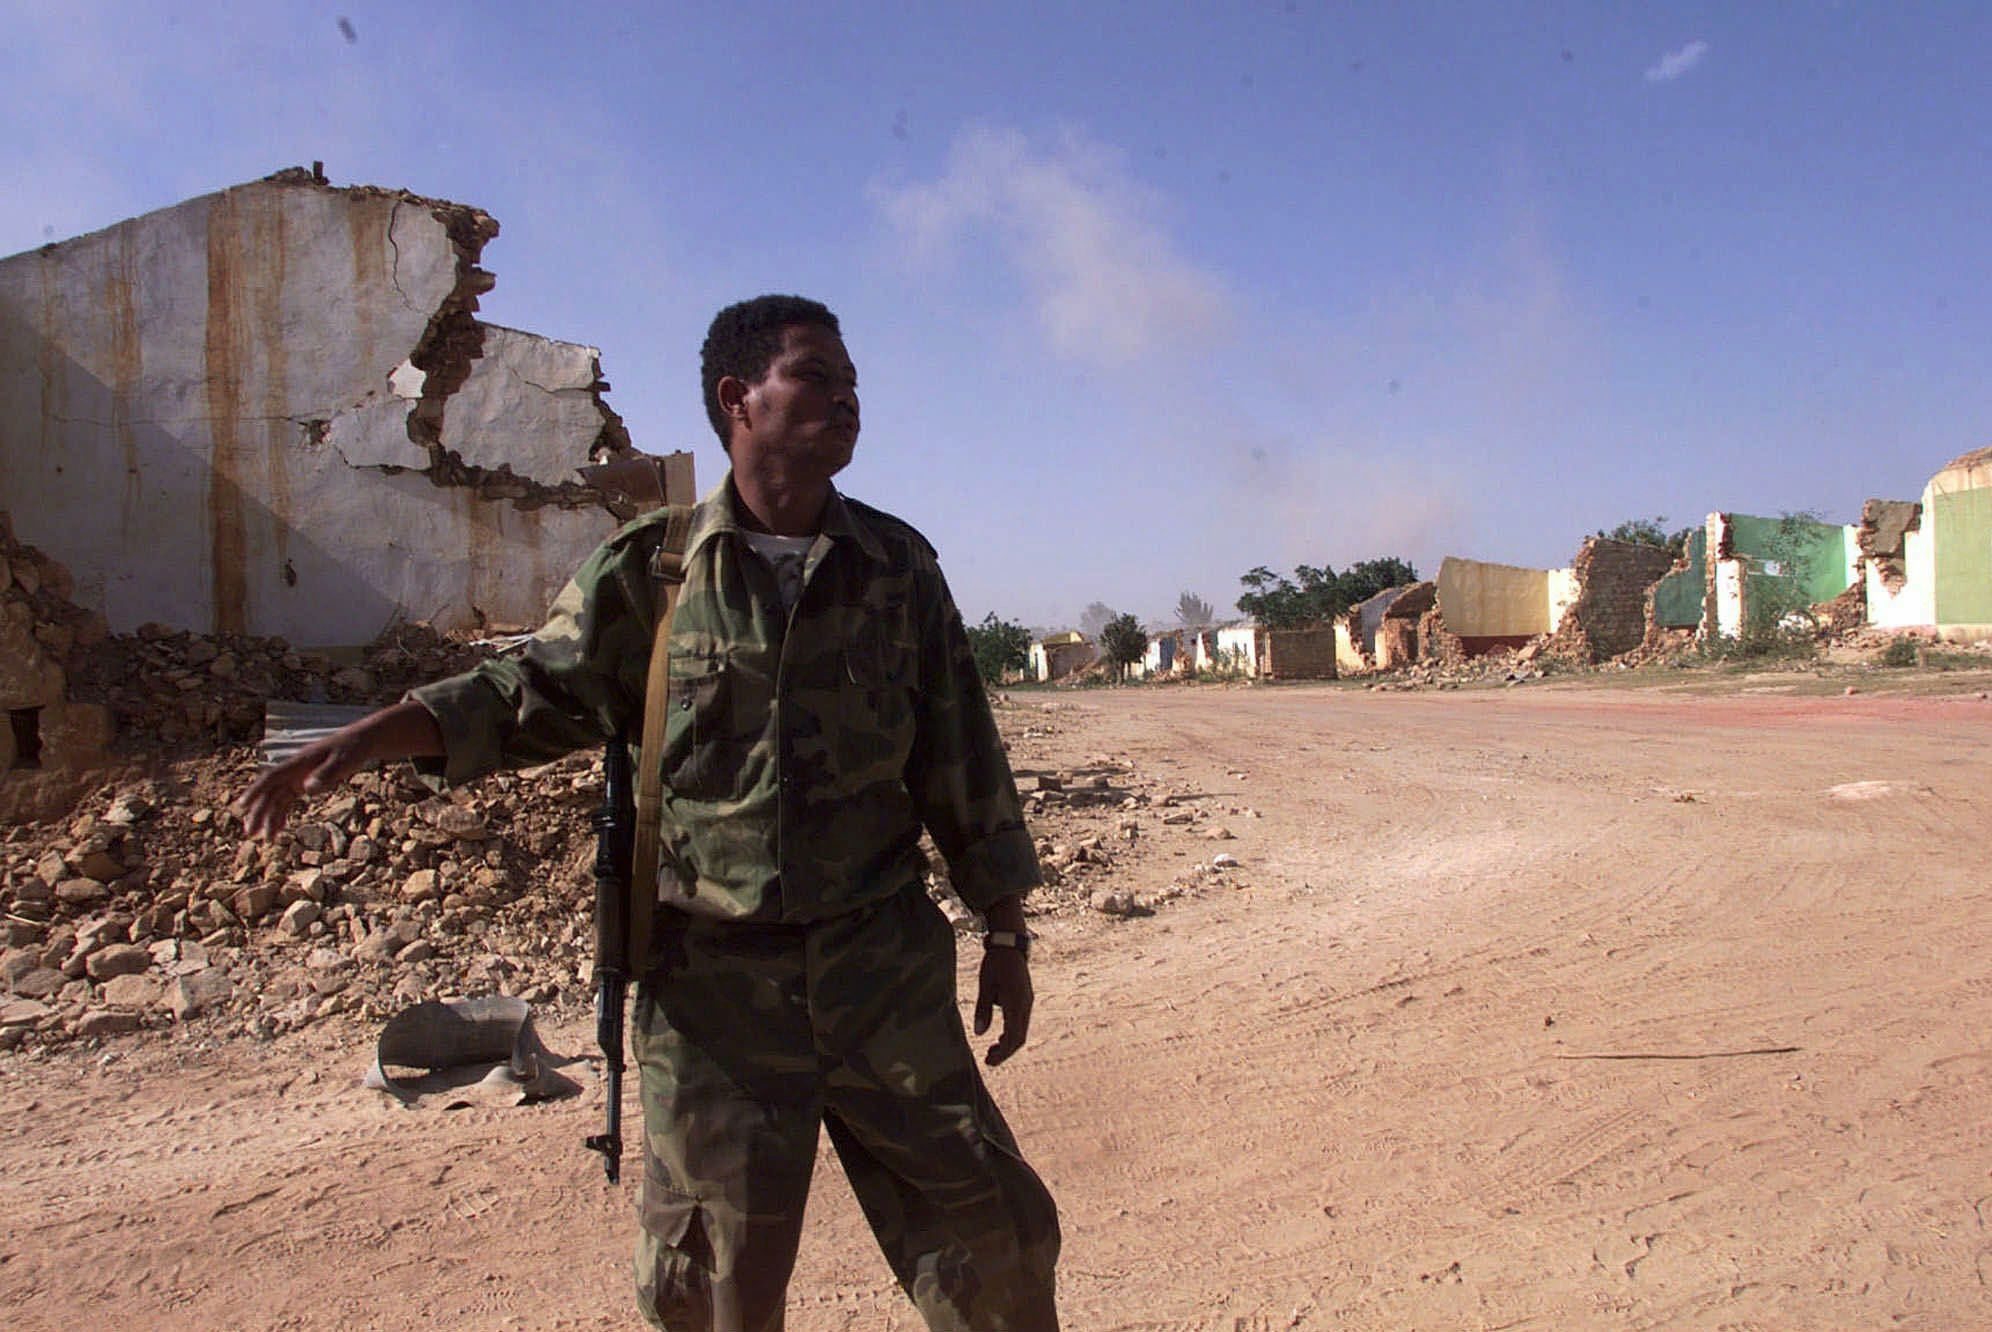 An Eritrean soldier tell his comrades to take shelter against shelling in the town of Zalambessa, 120 kms south of Asmara, Wednesday, May 24, 2000. The town has been thoroughly destroyed by the Ethiopian army some months ago. The town, in the disputed area between Eritrea and Ethiopia is under Eritrean control. Wednesday is Independence Day in Eritrea, gained nine years ago from Ethiopia. (KEYSTONE/AP/Jean-Marc Bouju) ERITREA HORN OF AFRICA WAR